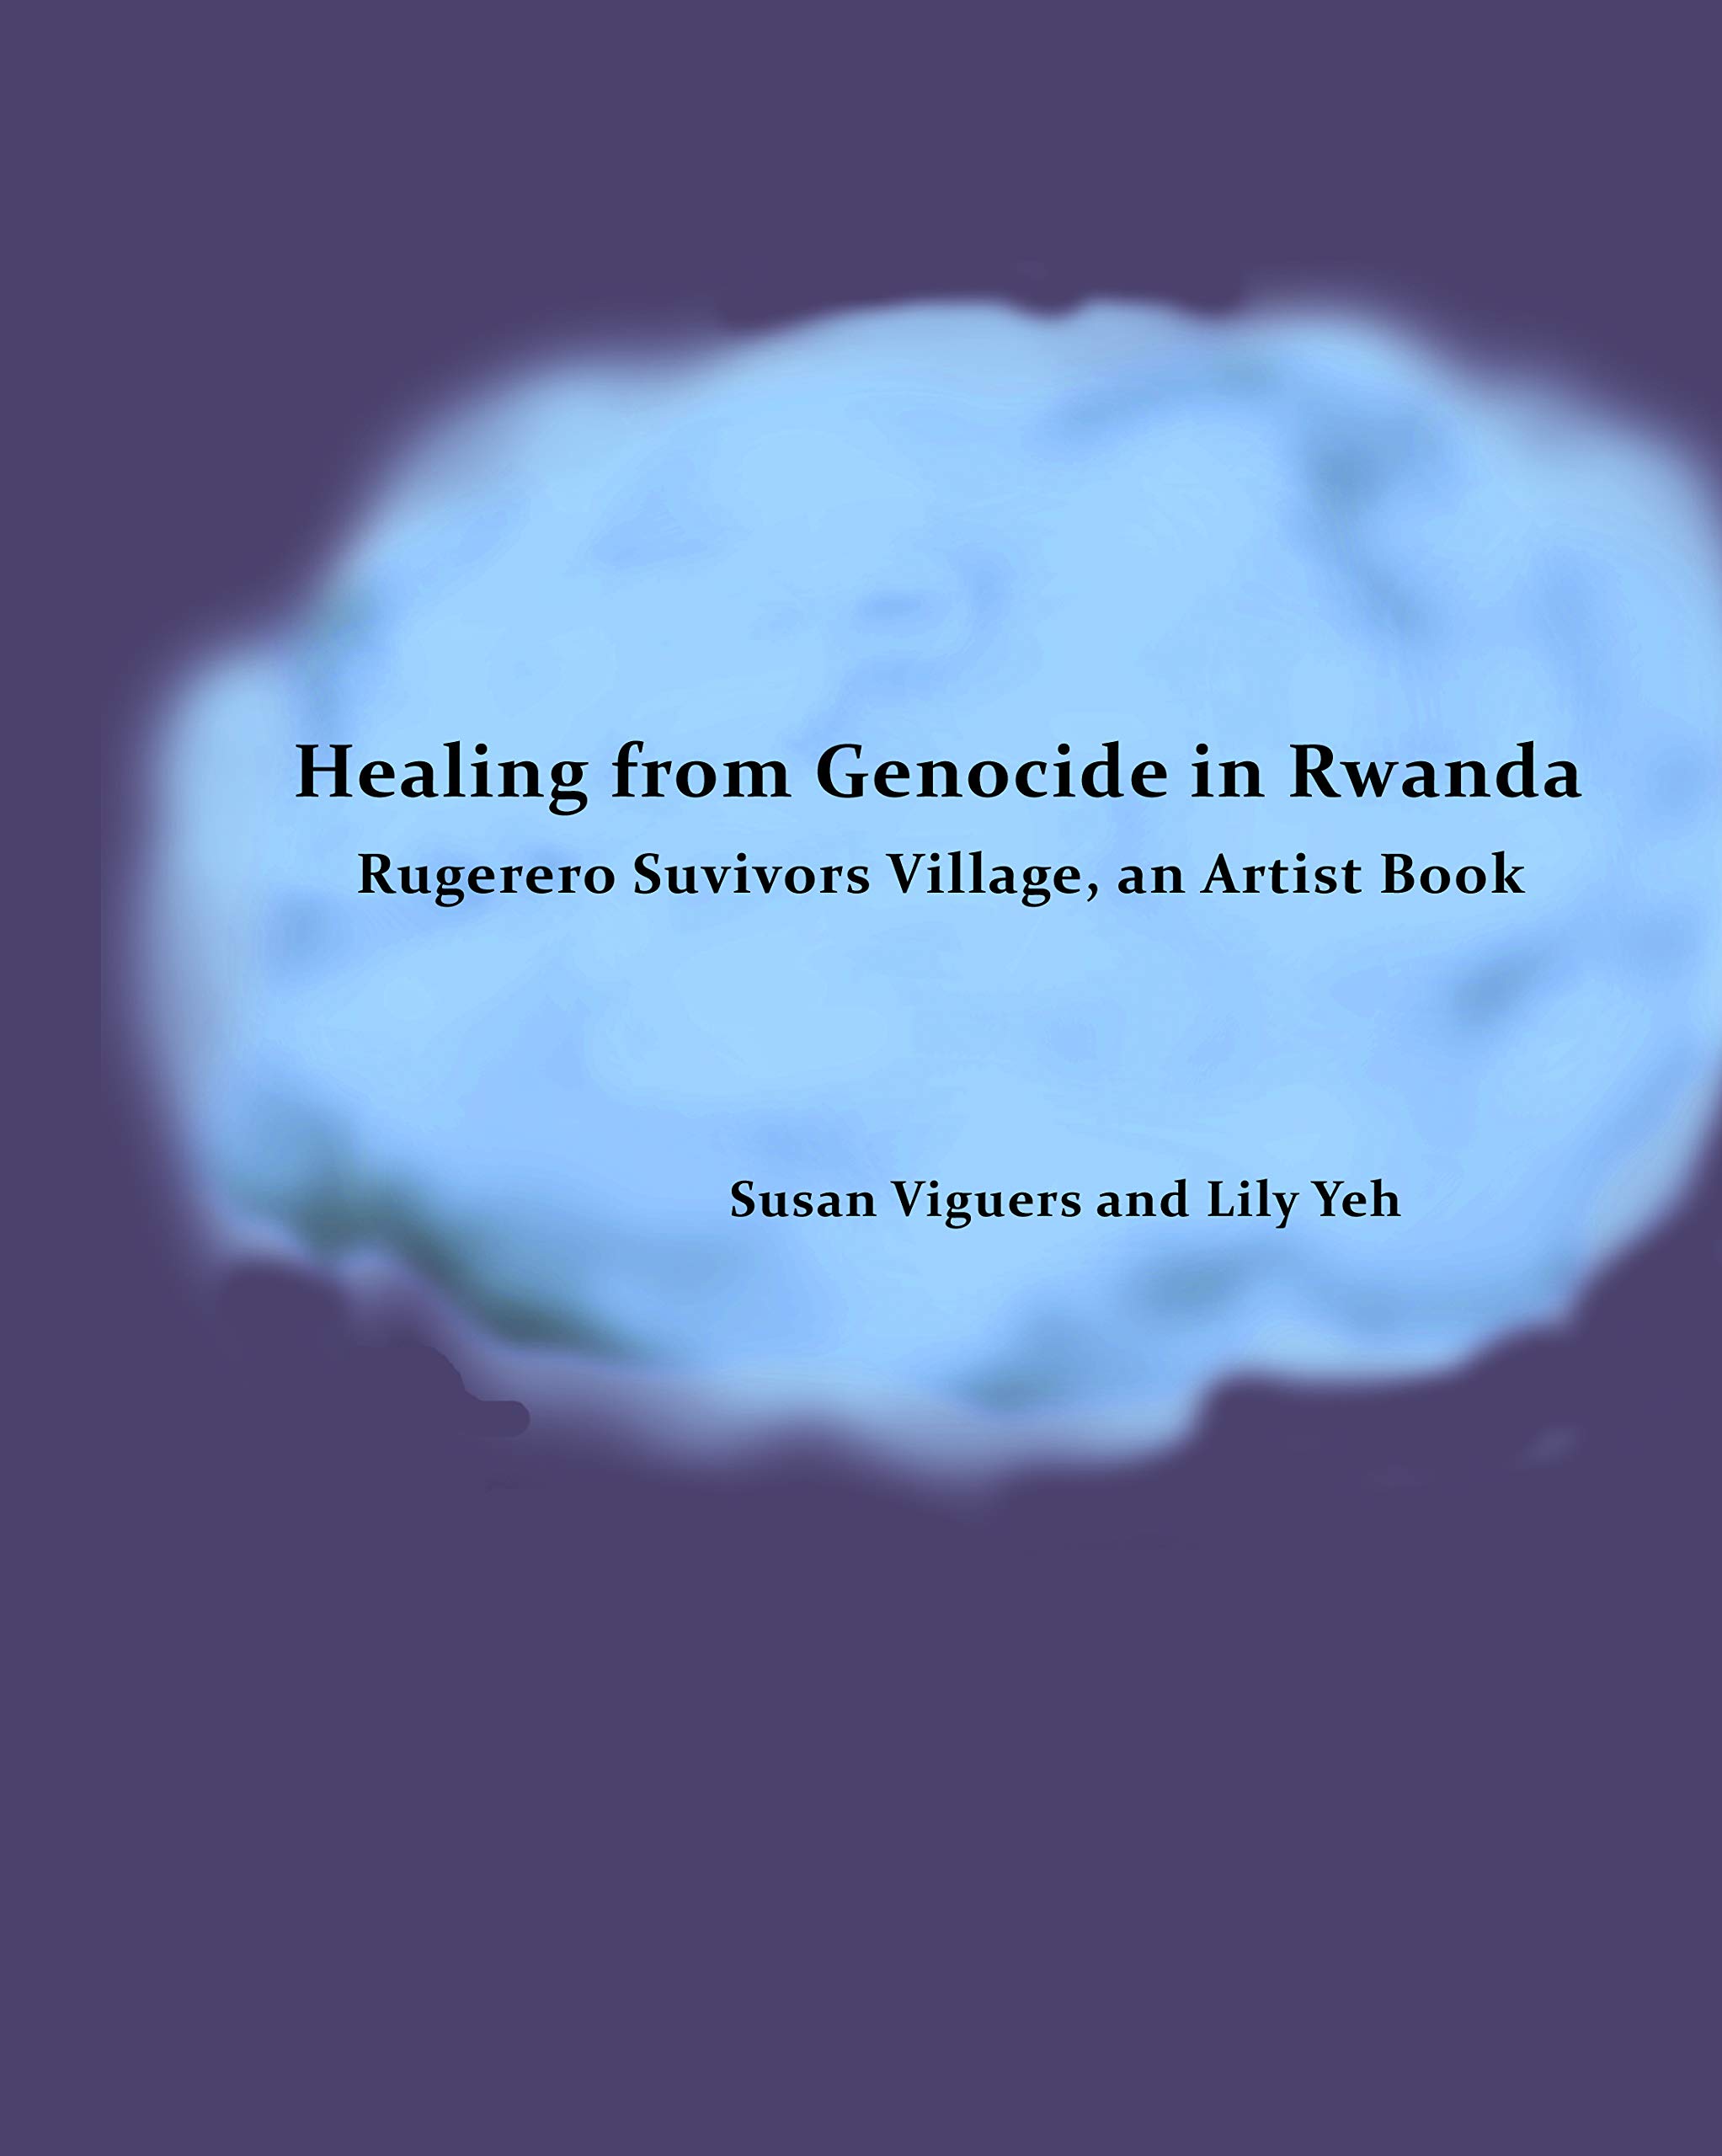 Healing from Genocide in Rwanda | Dr. Susan Viguers, Lily Yeh